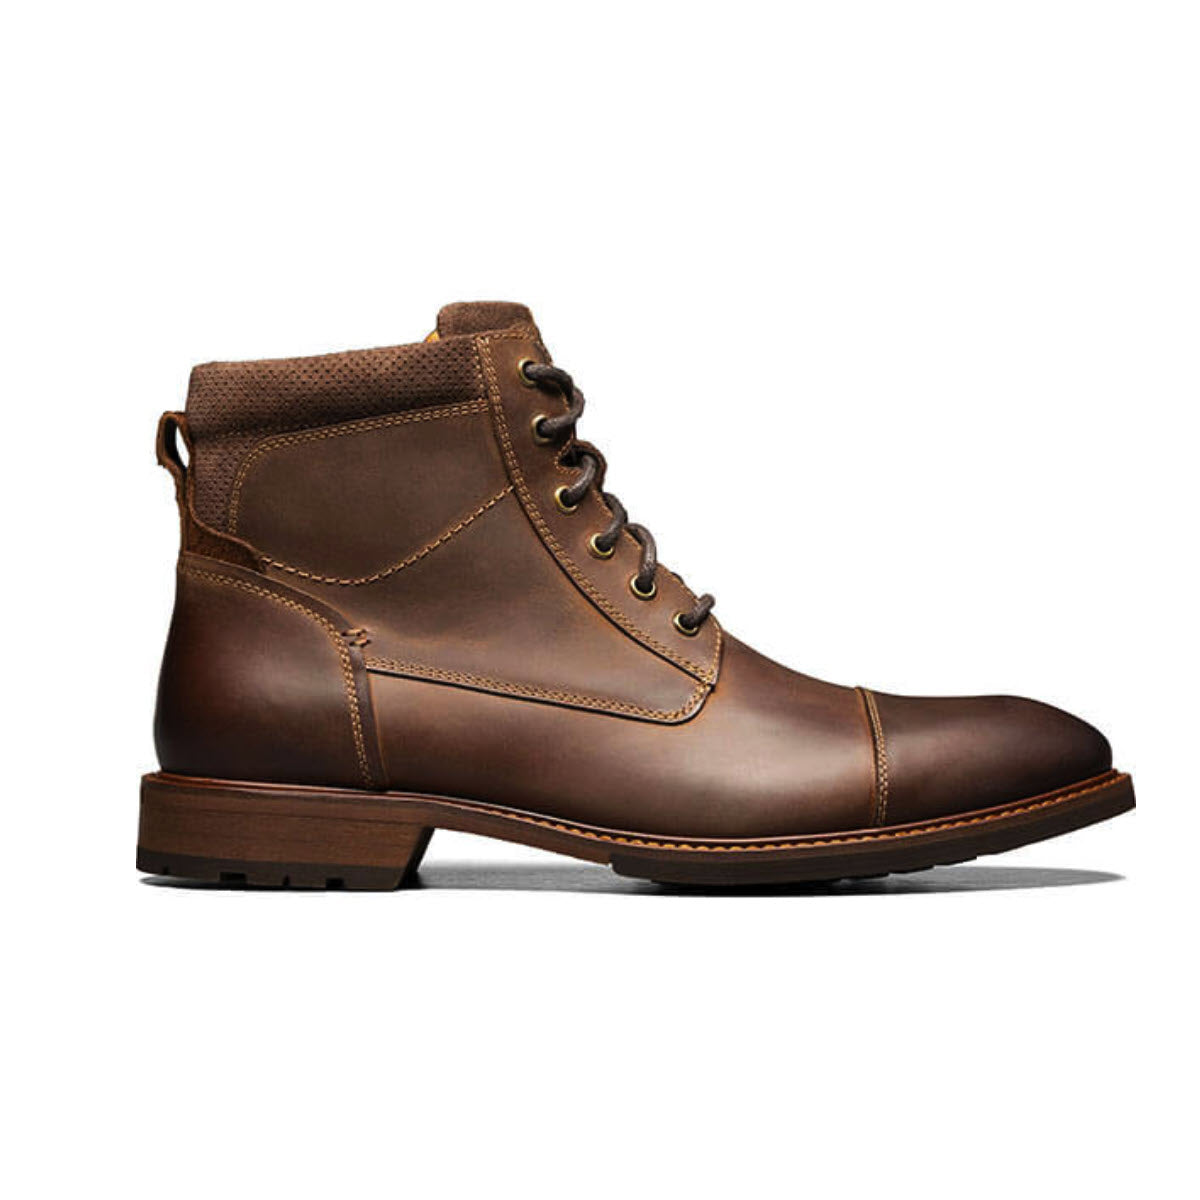 A Florsheim Lodge cap toe lace-up work boot with a low heel, displayed against a plain white background.